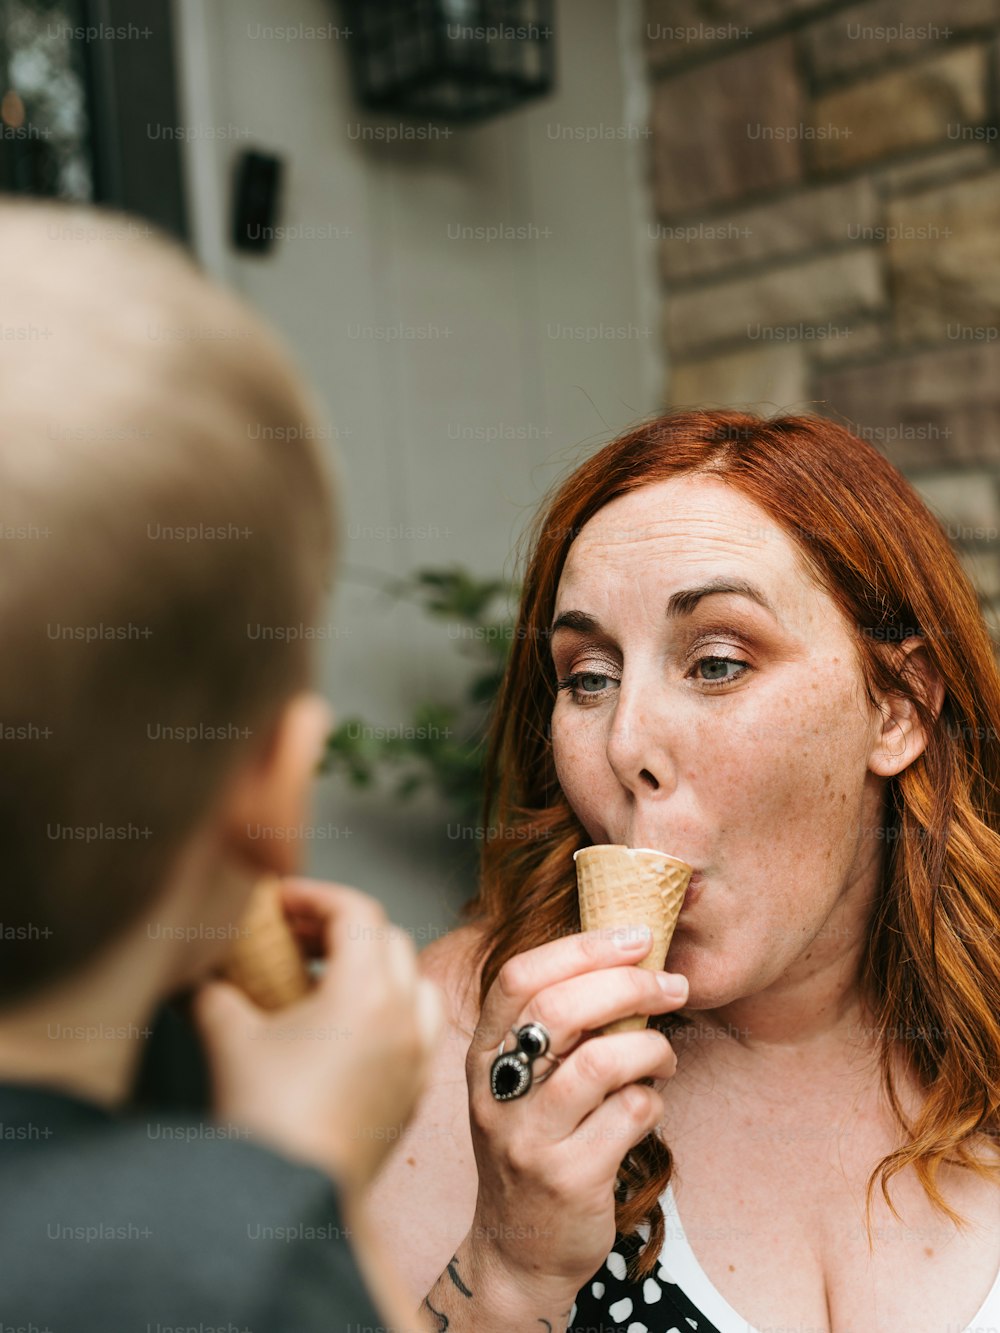 a woman eating an ice cream cone in front of a man